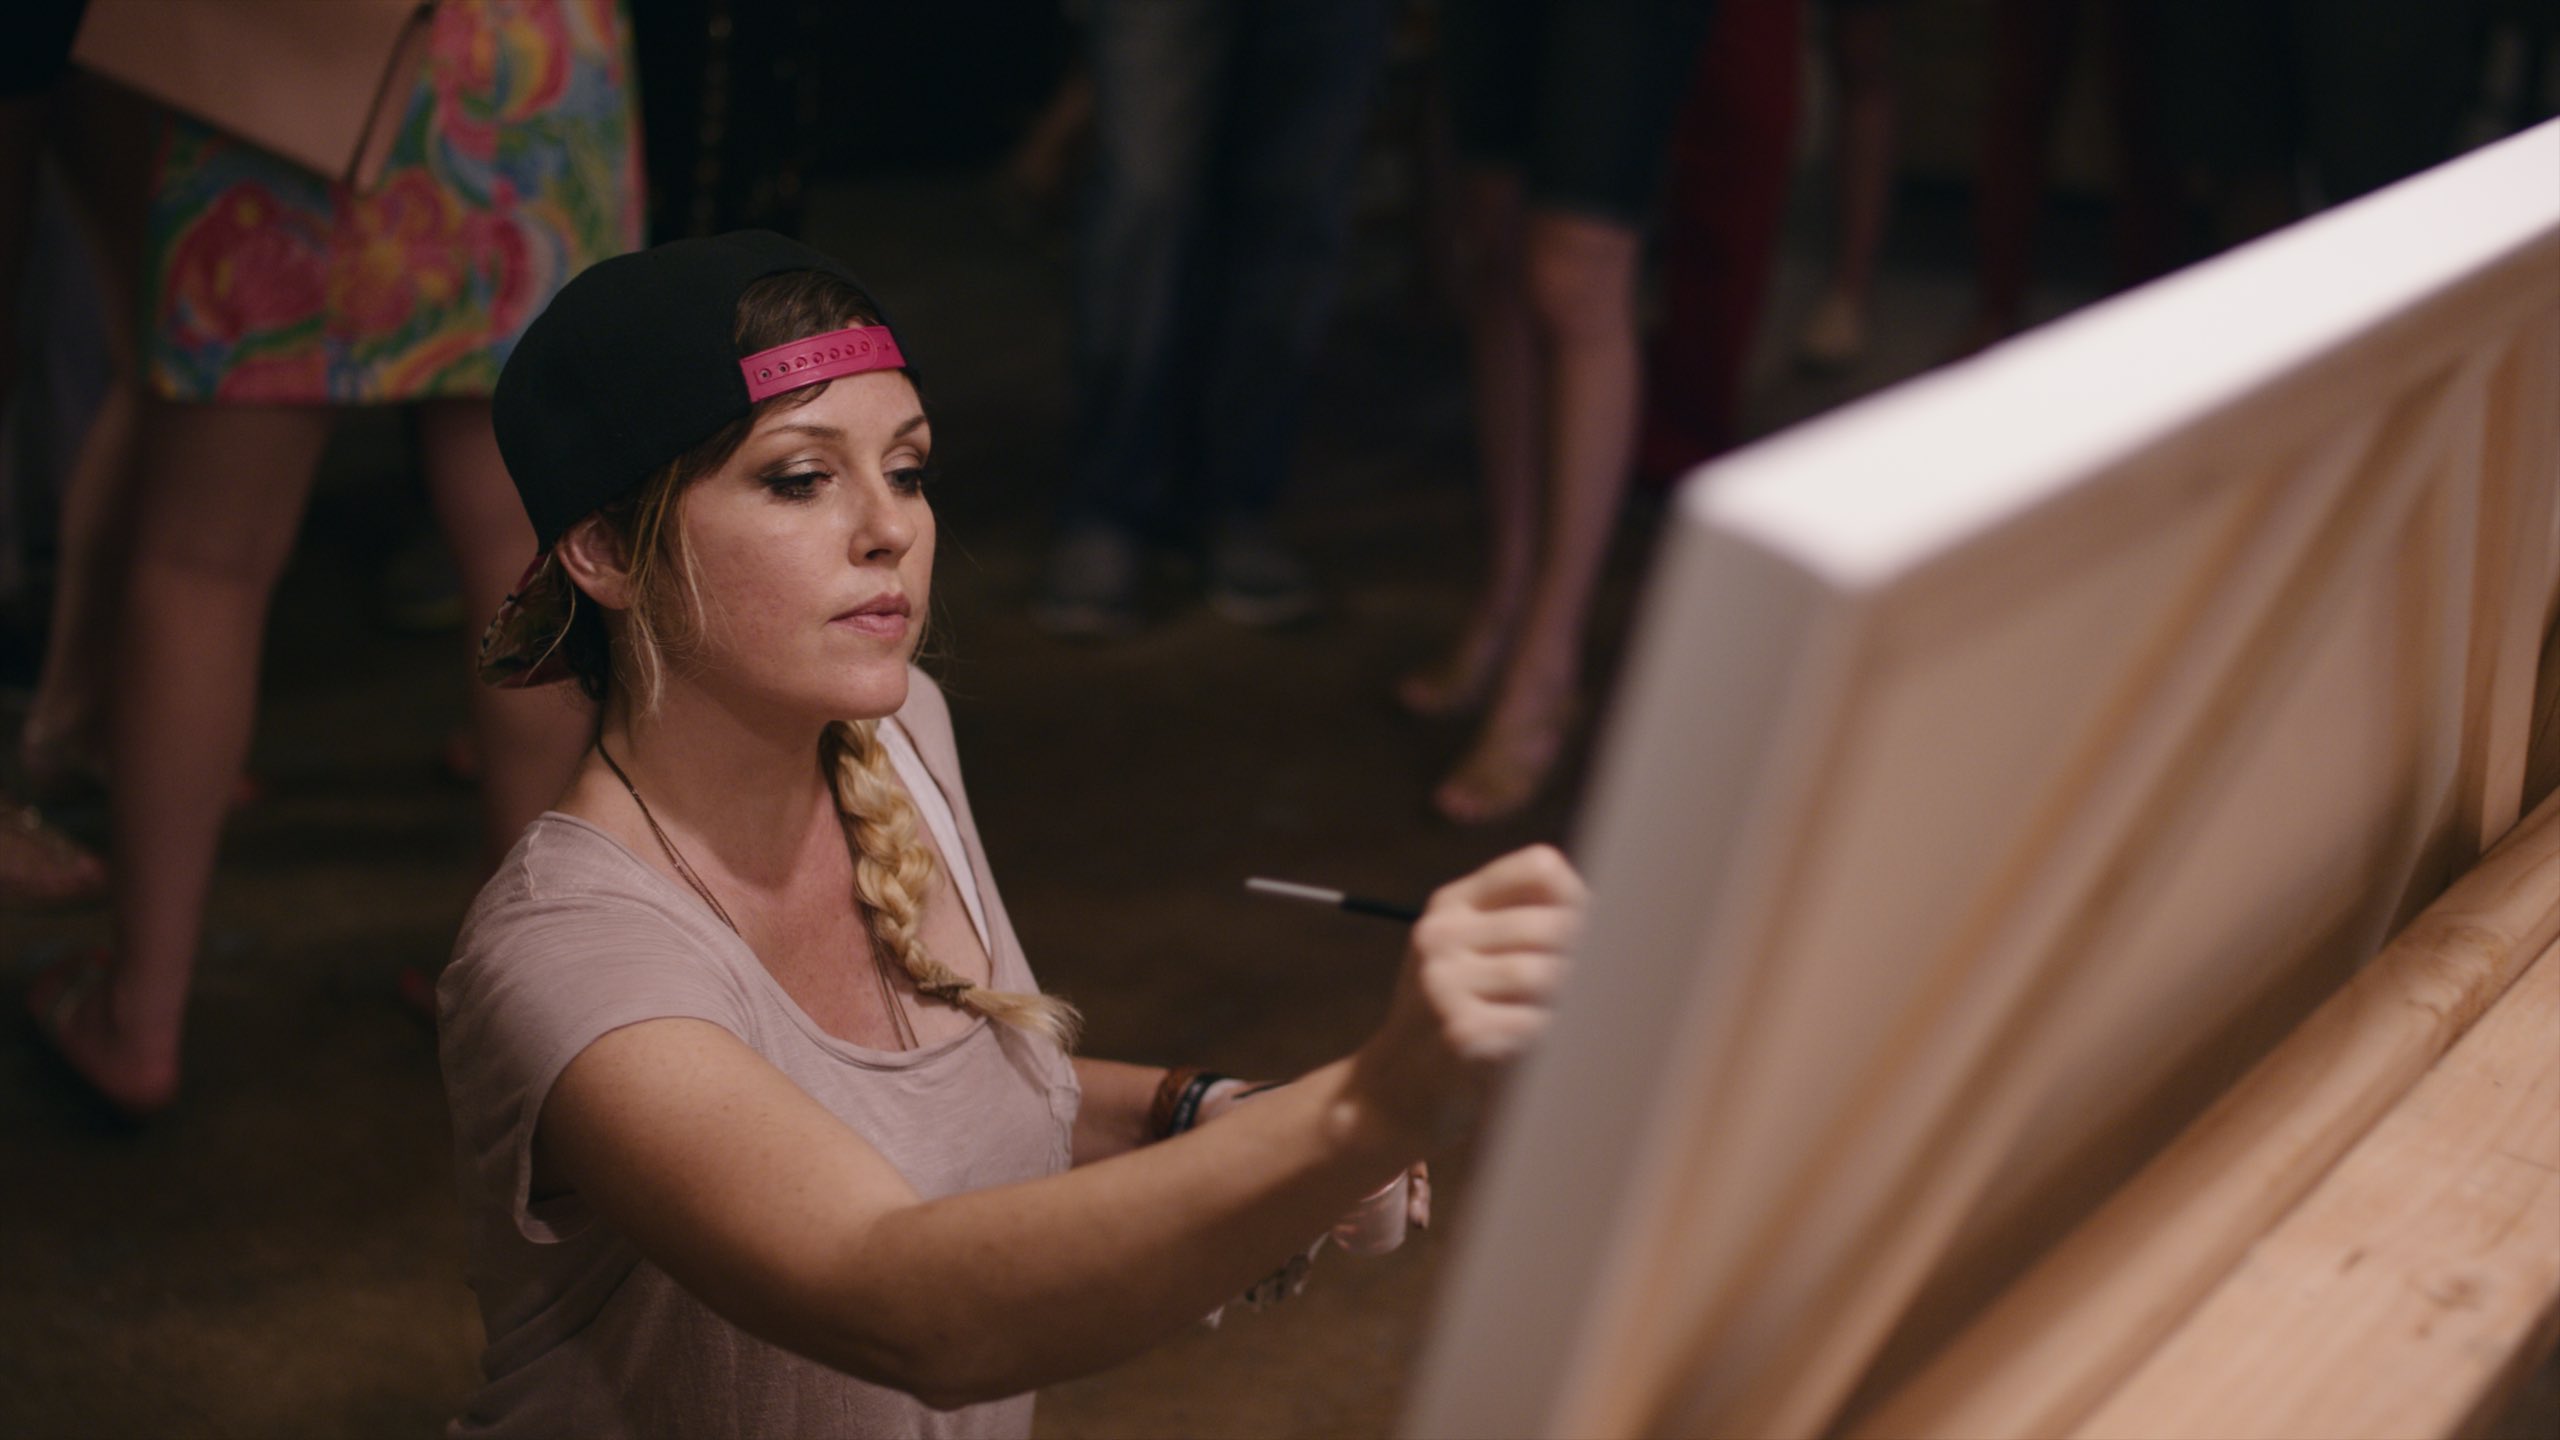 Art Battle International Woman with long blond hair wearing a black and pink cap on backwards painting on canvas with people behind her